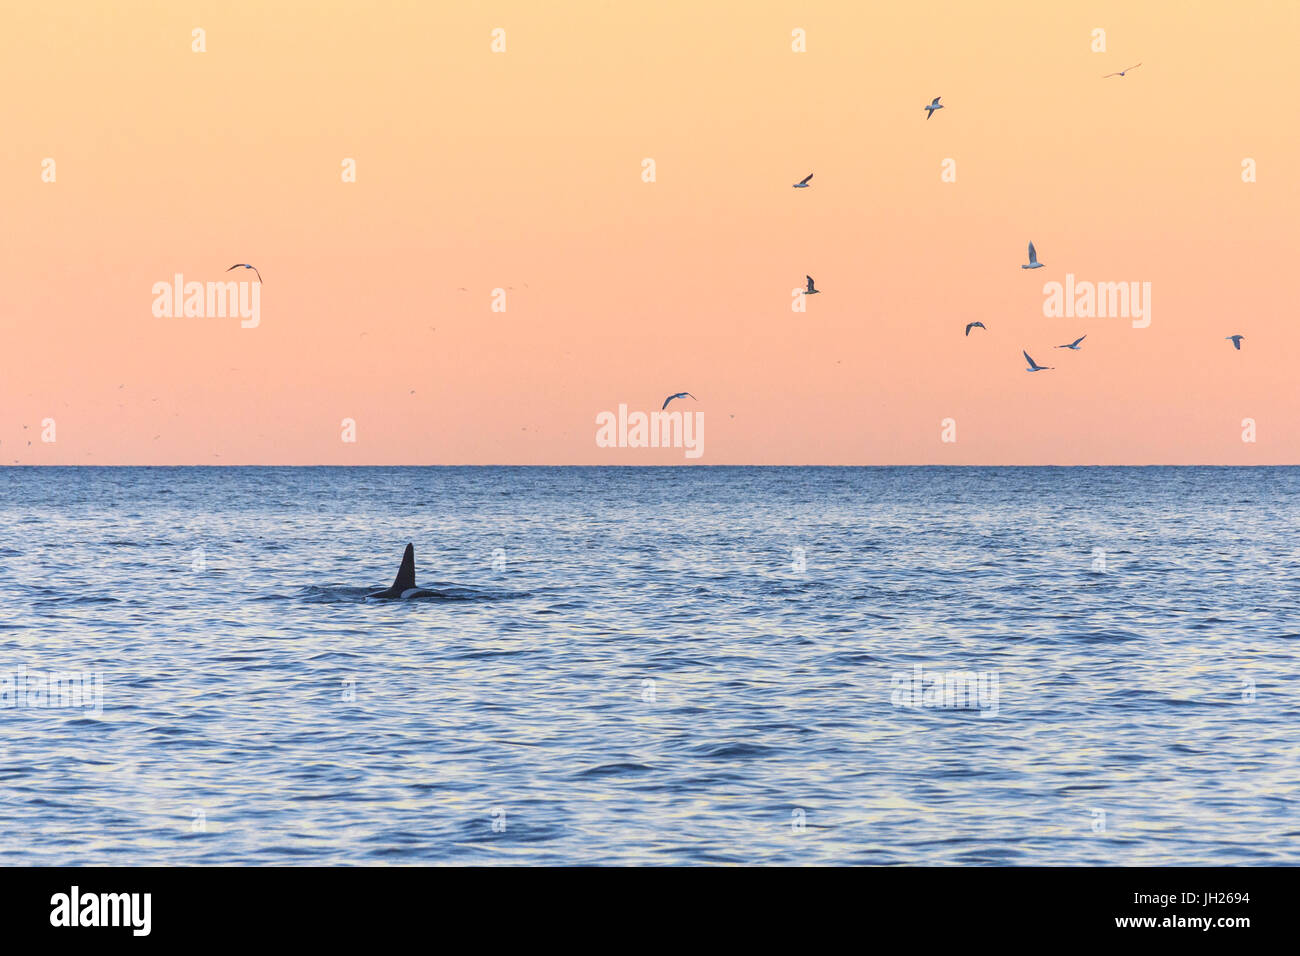 A killer whale in the cold sea framed by seagulls flying in pink sky at dawn, Tungeneset, Senja, Troms, Norway, Scandinavia Stock Photo